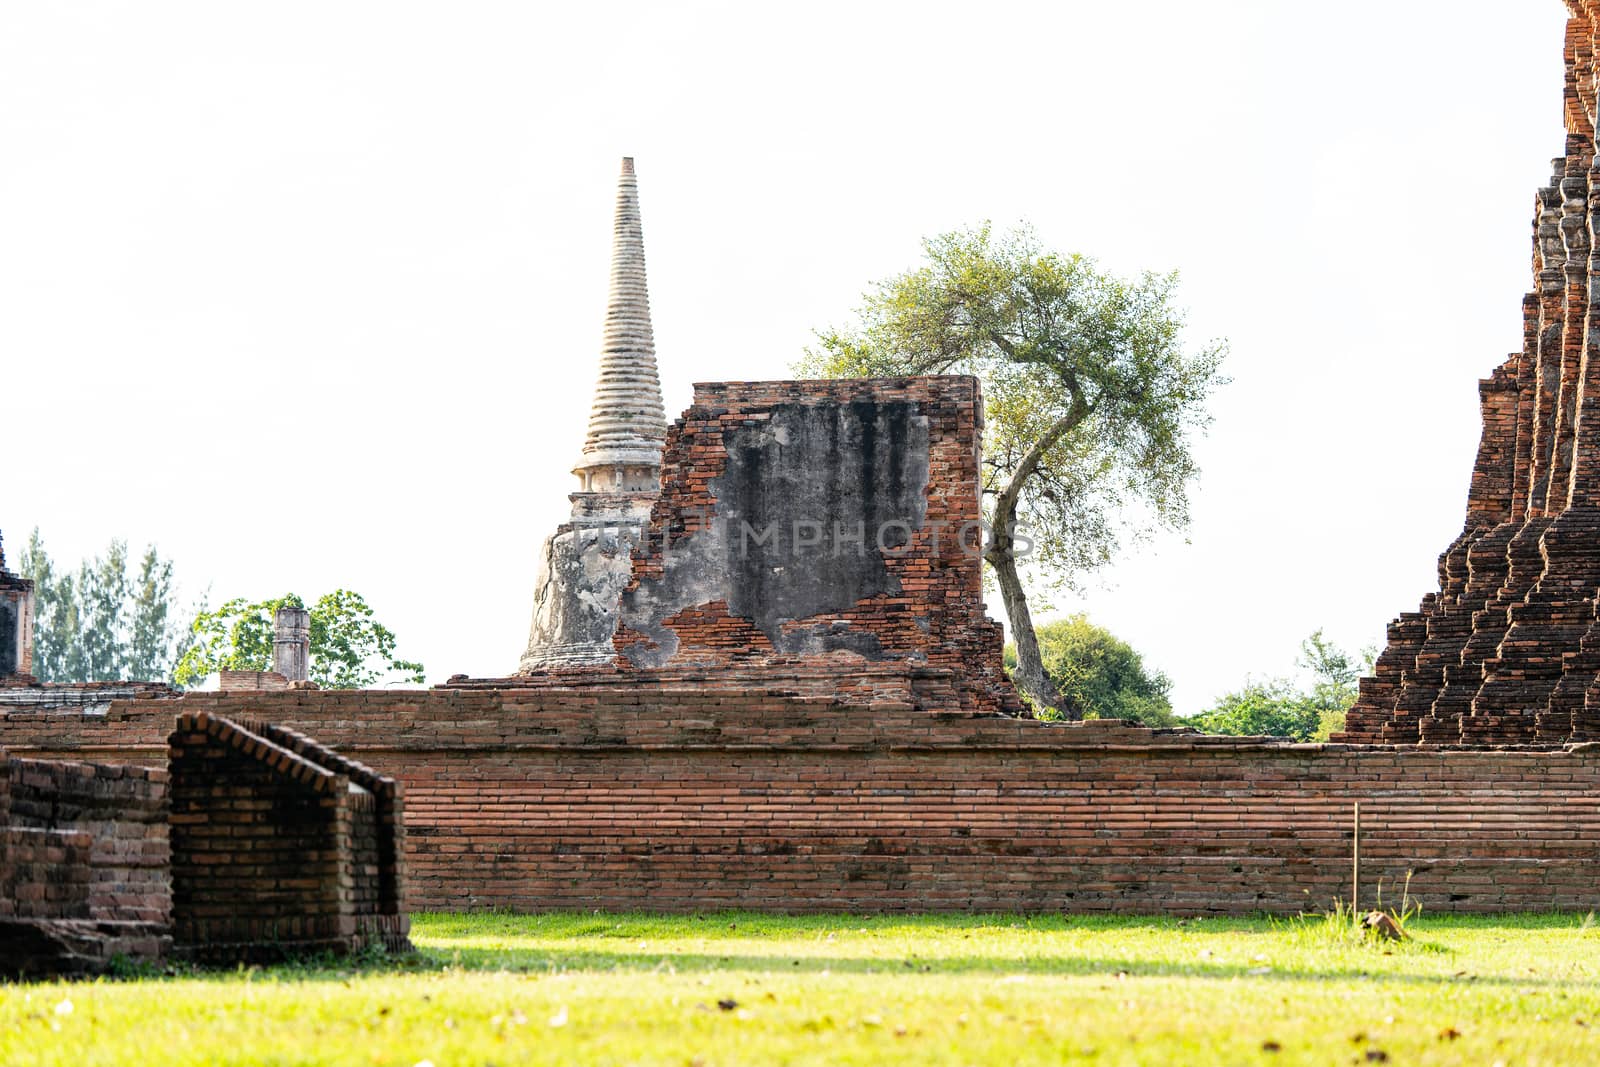 Architecture of the Famous Old Temple in Ayutthaya, Temple in Ph by ToonPhotoClub